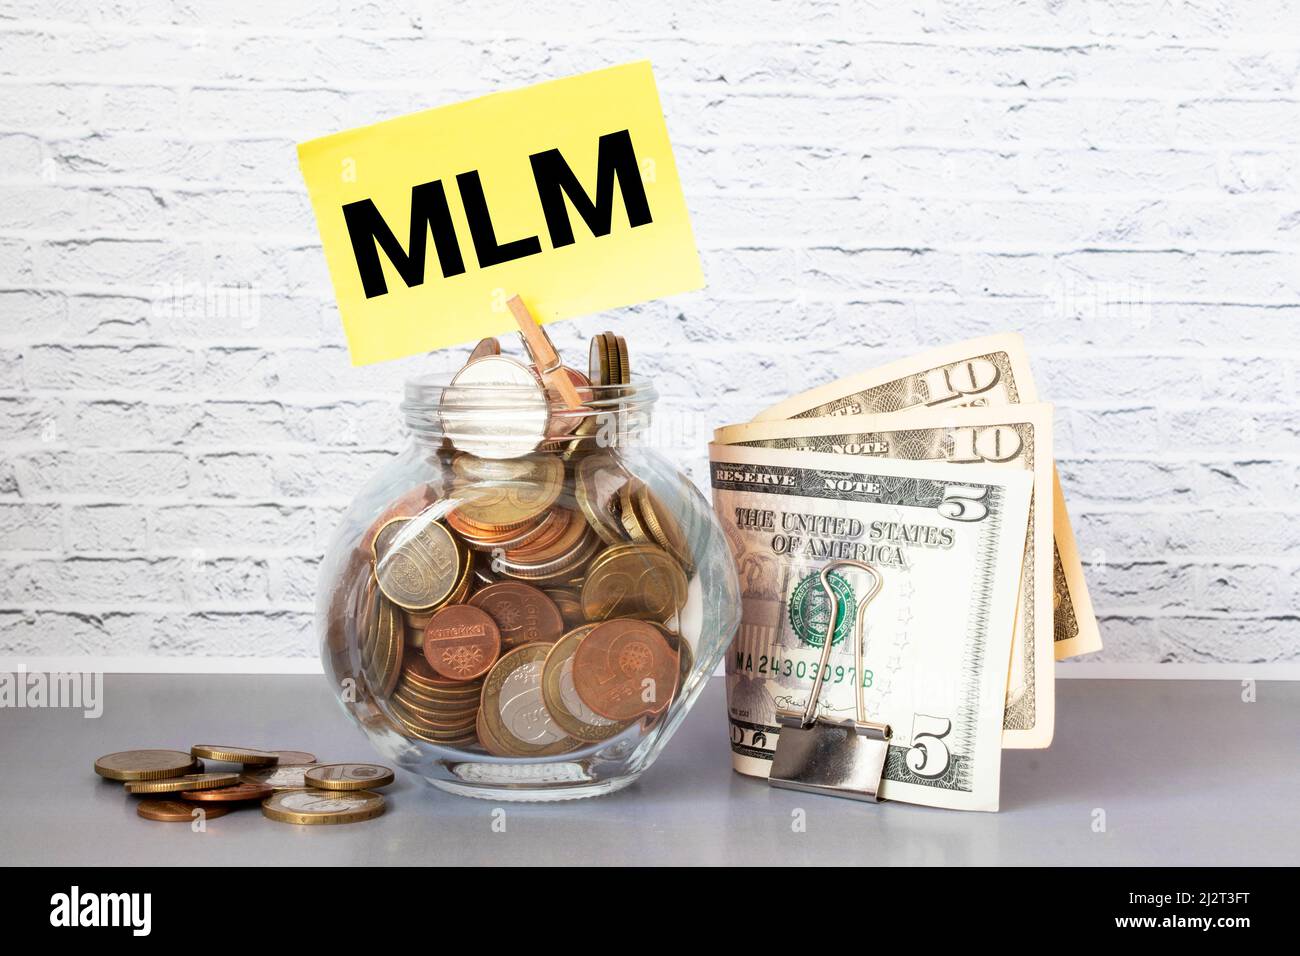 Top view of money with MLM or Multi Level Marketing wording. Business concept Stock Photo